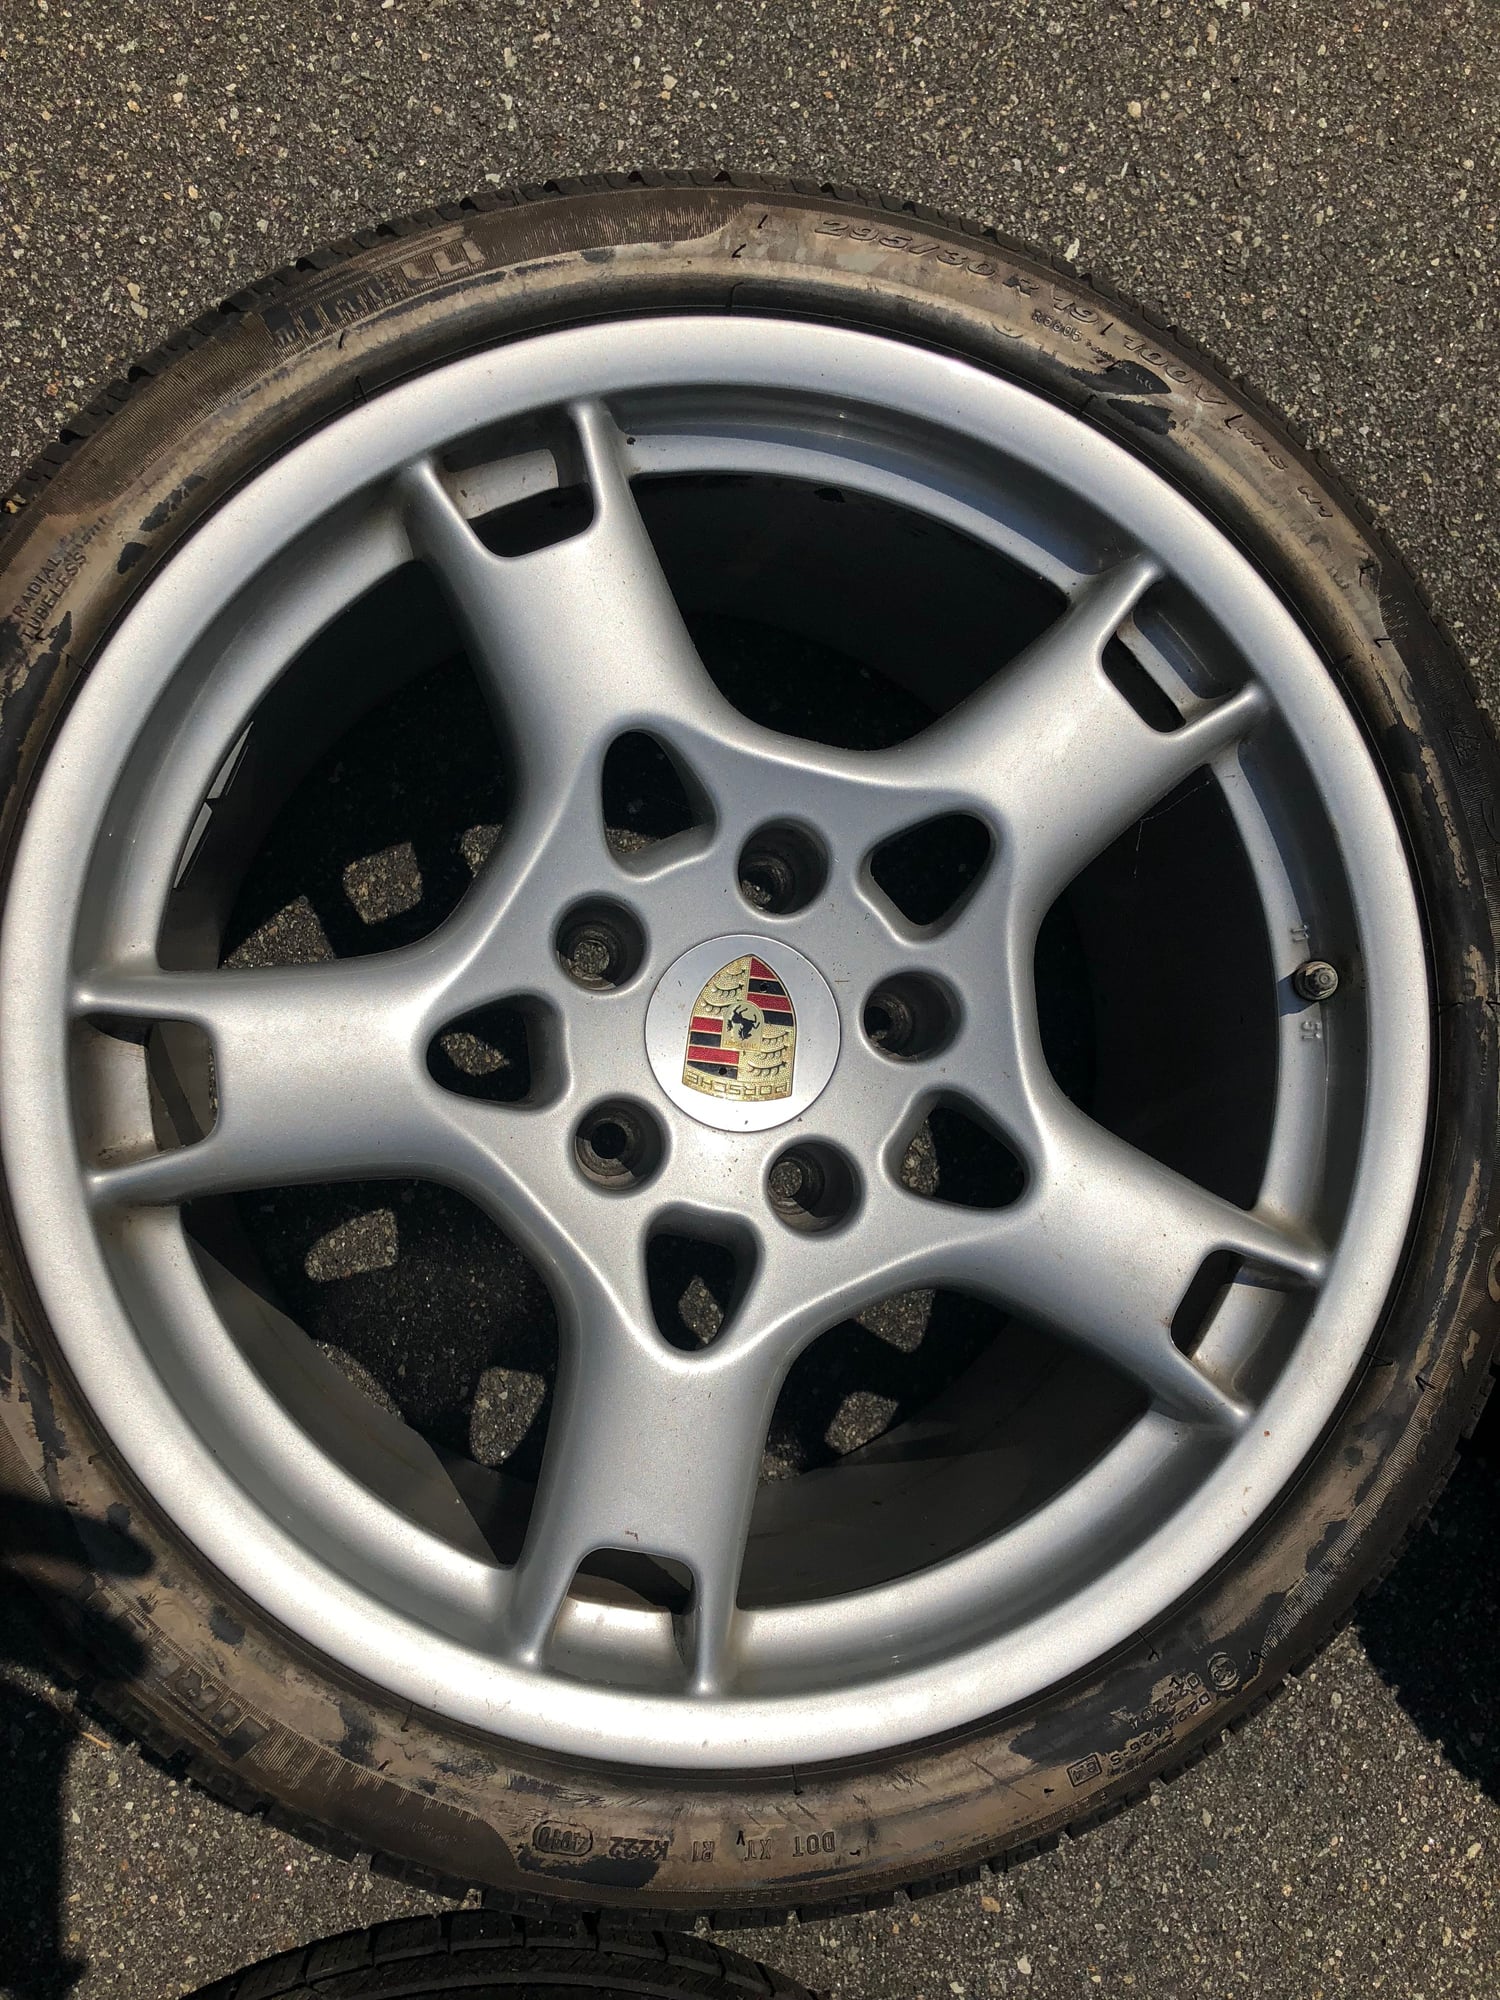 Wheels and Tires/Axles - OEM Lobster Claw/ Perfect! - Used - All Years Porsche 911 - Parsippany, NJ 07054, United States